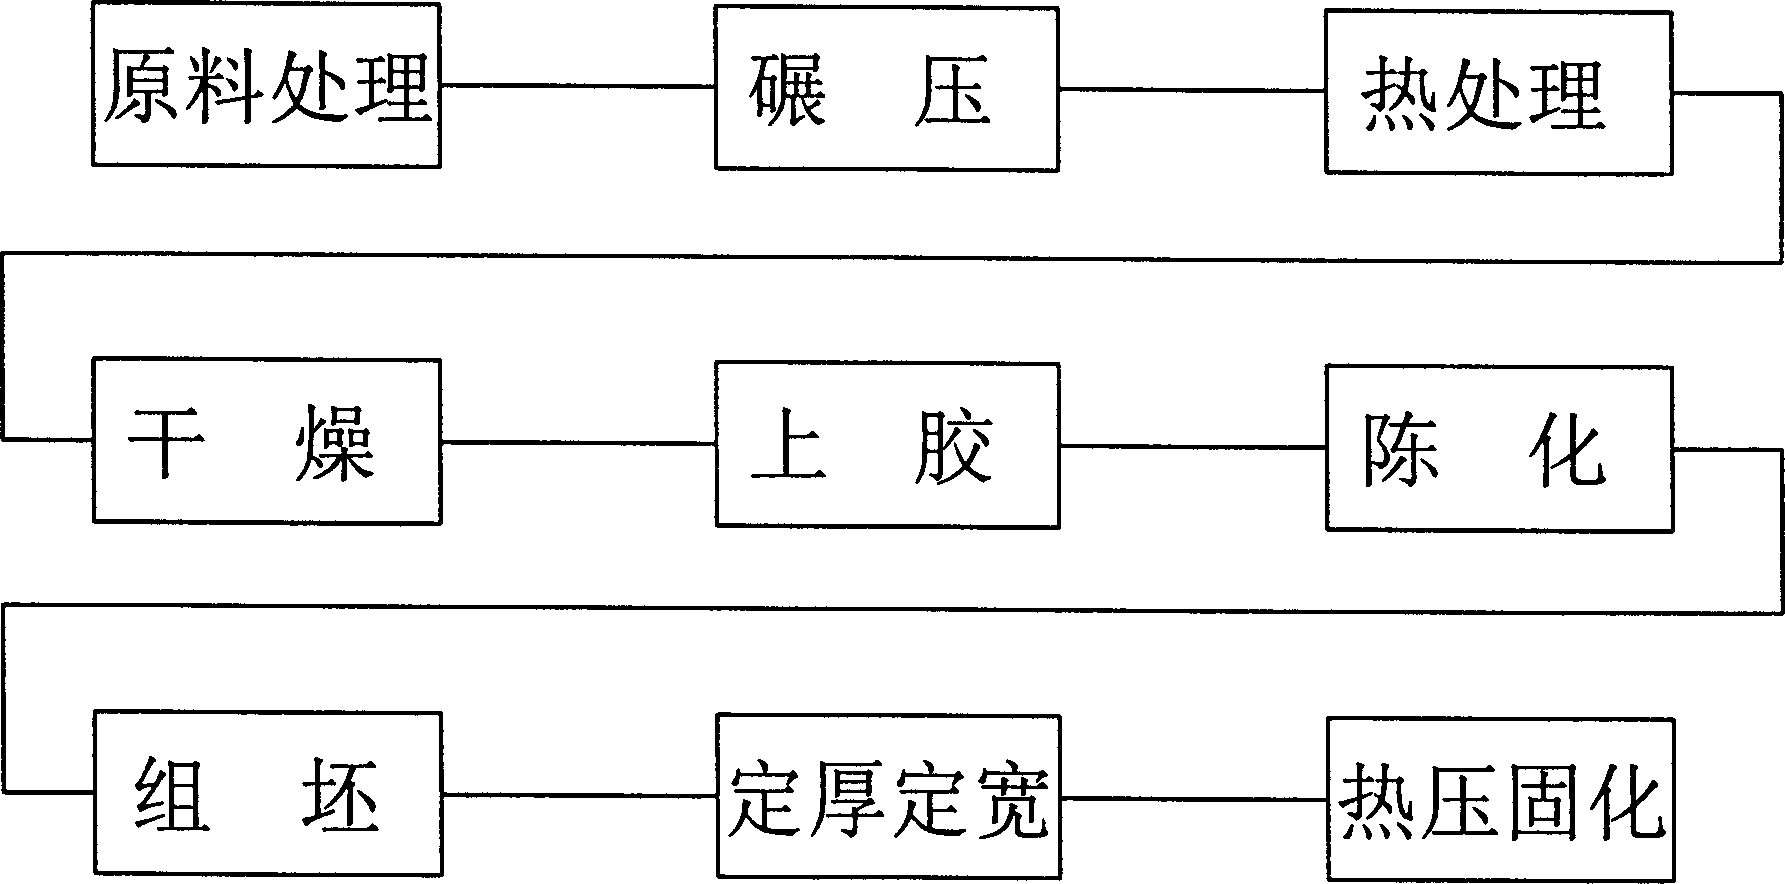 Bamboo-wood composite section bar production method